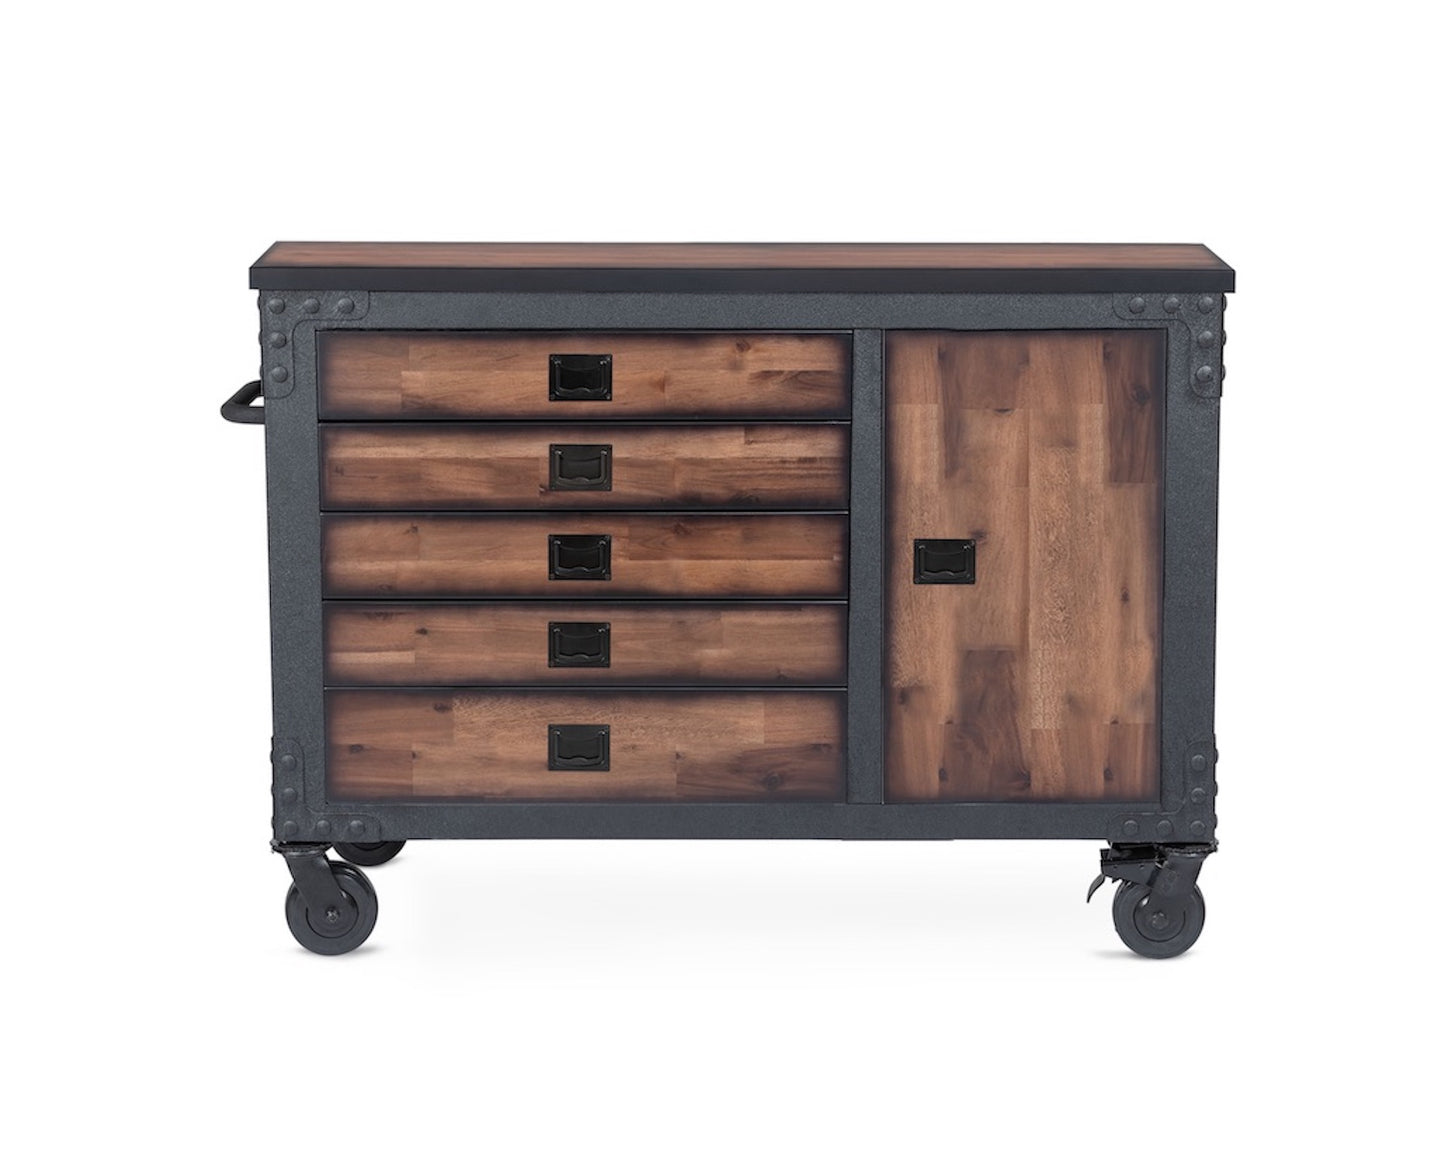 Duramax 48" 5 Drawer Rolling Tool Chest with Wood Top